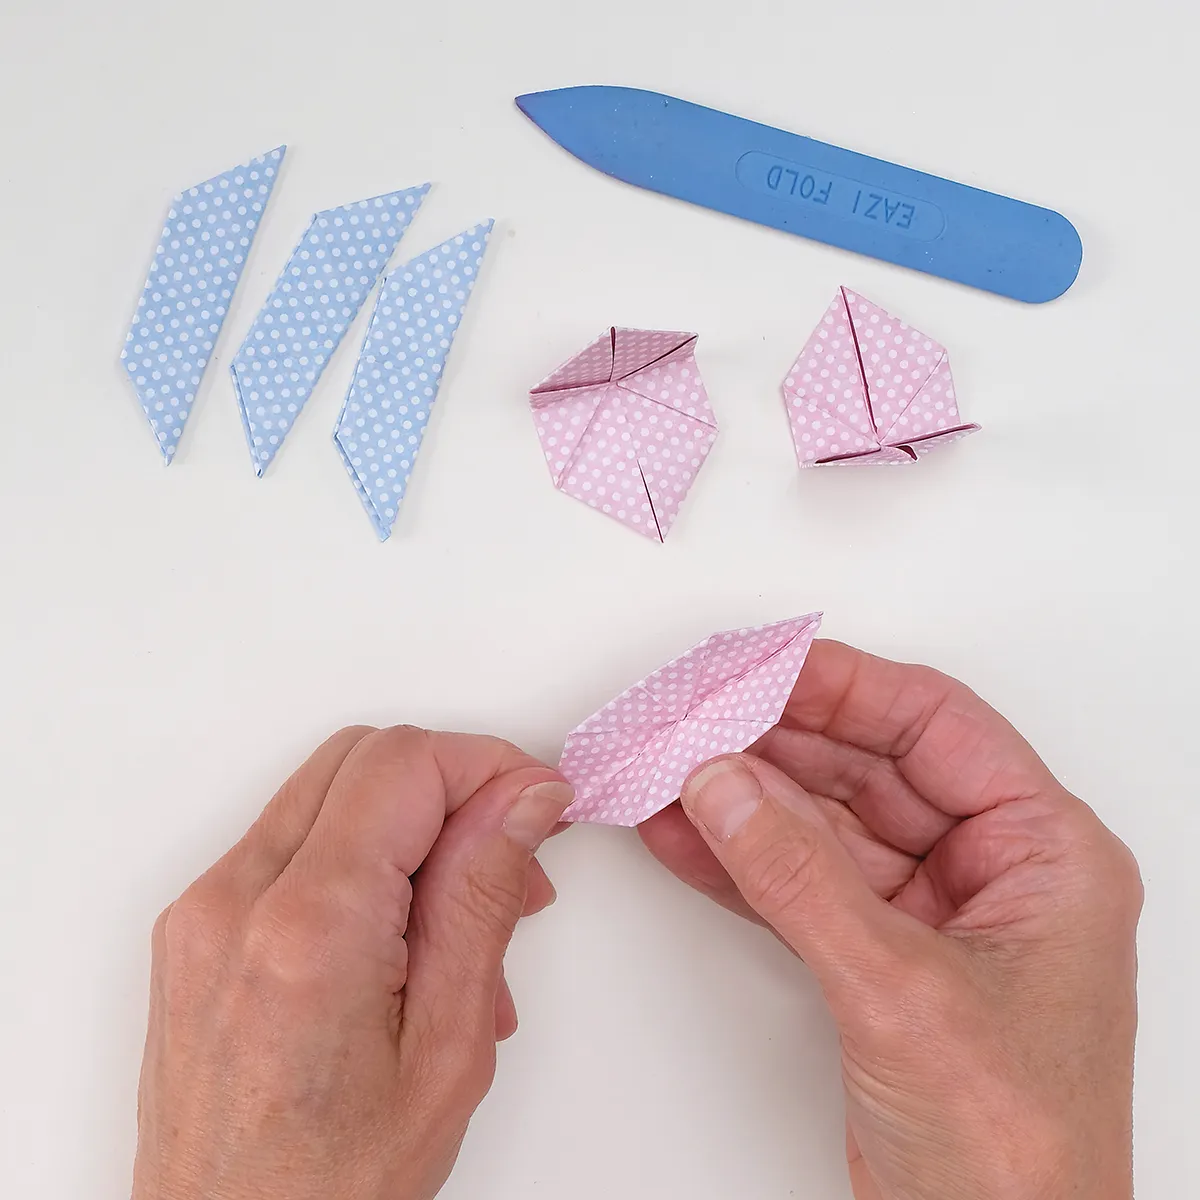 How to make an origami wreath - step 3